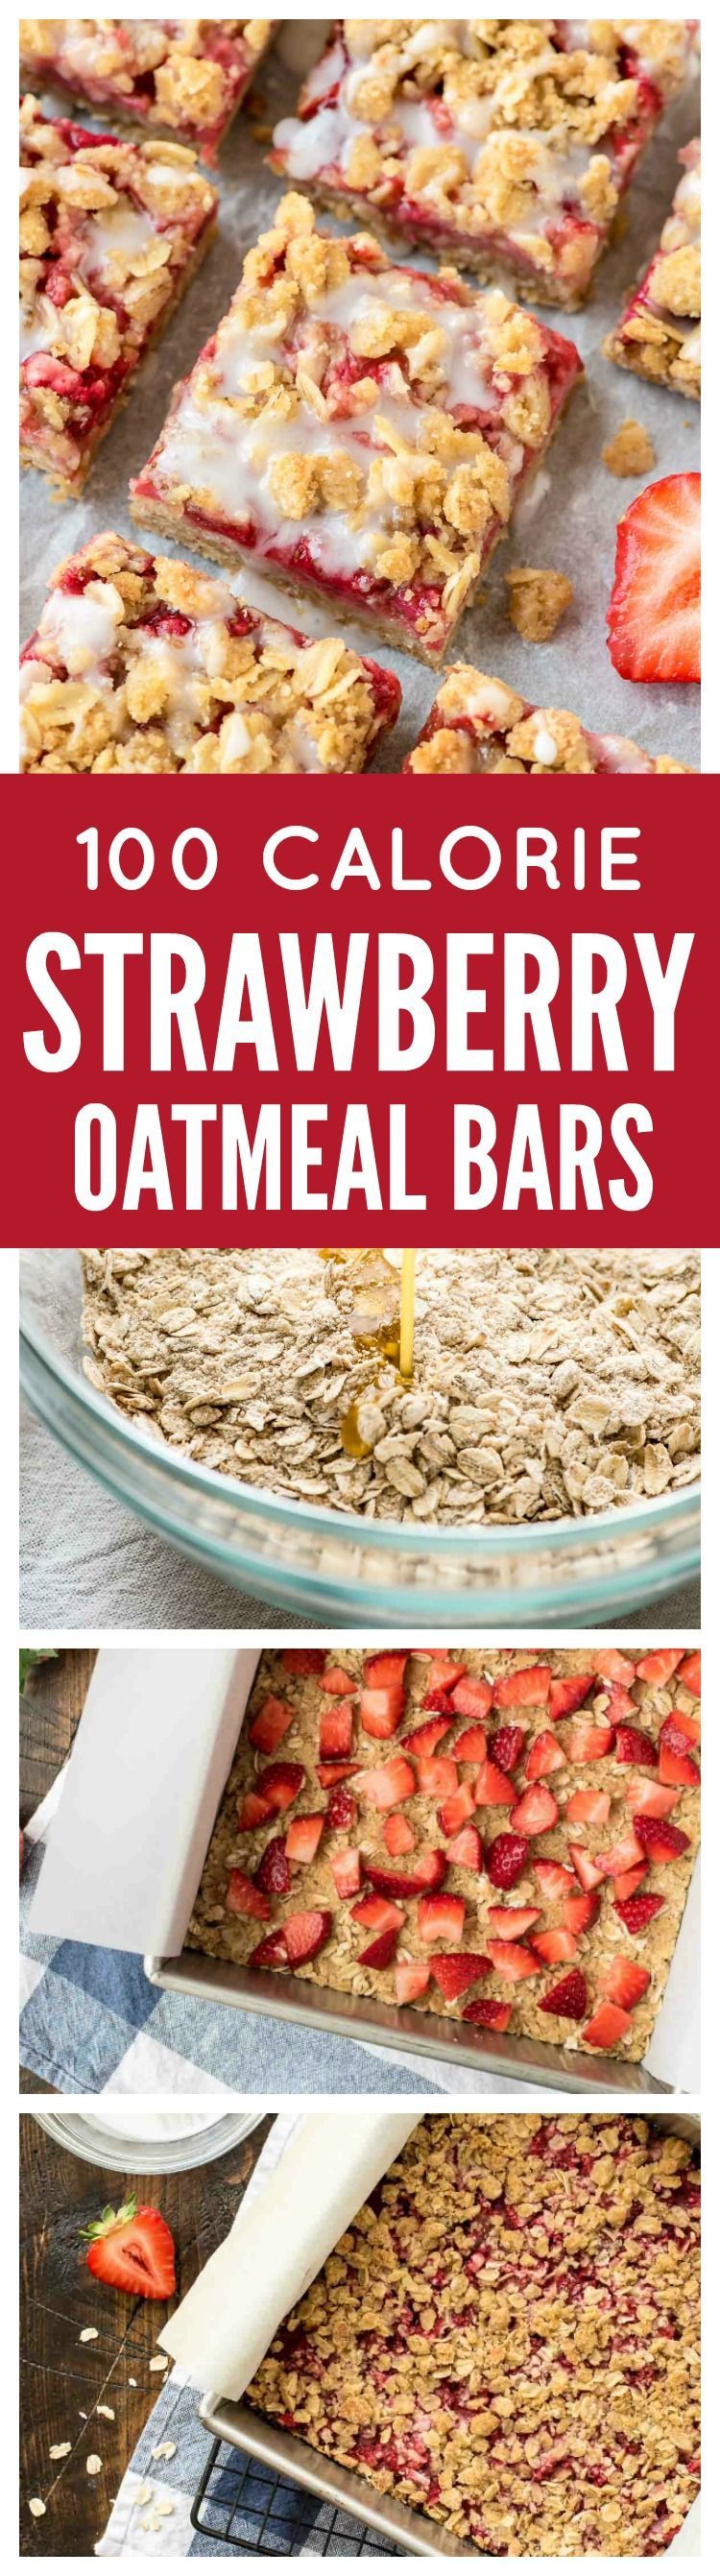 These buttery Strawberry Oatmeal Bars are only 100 CALORIES EACH!! With a buttery